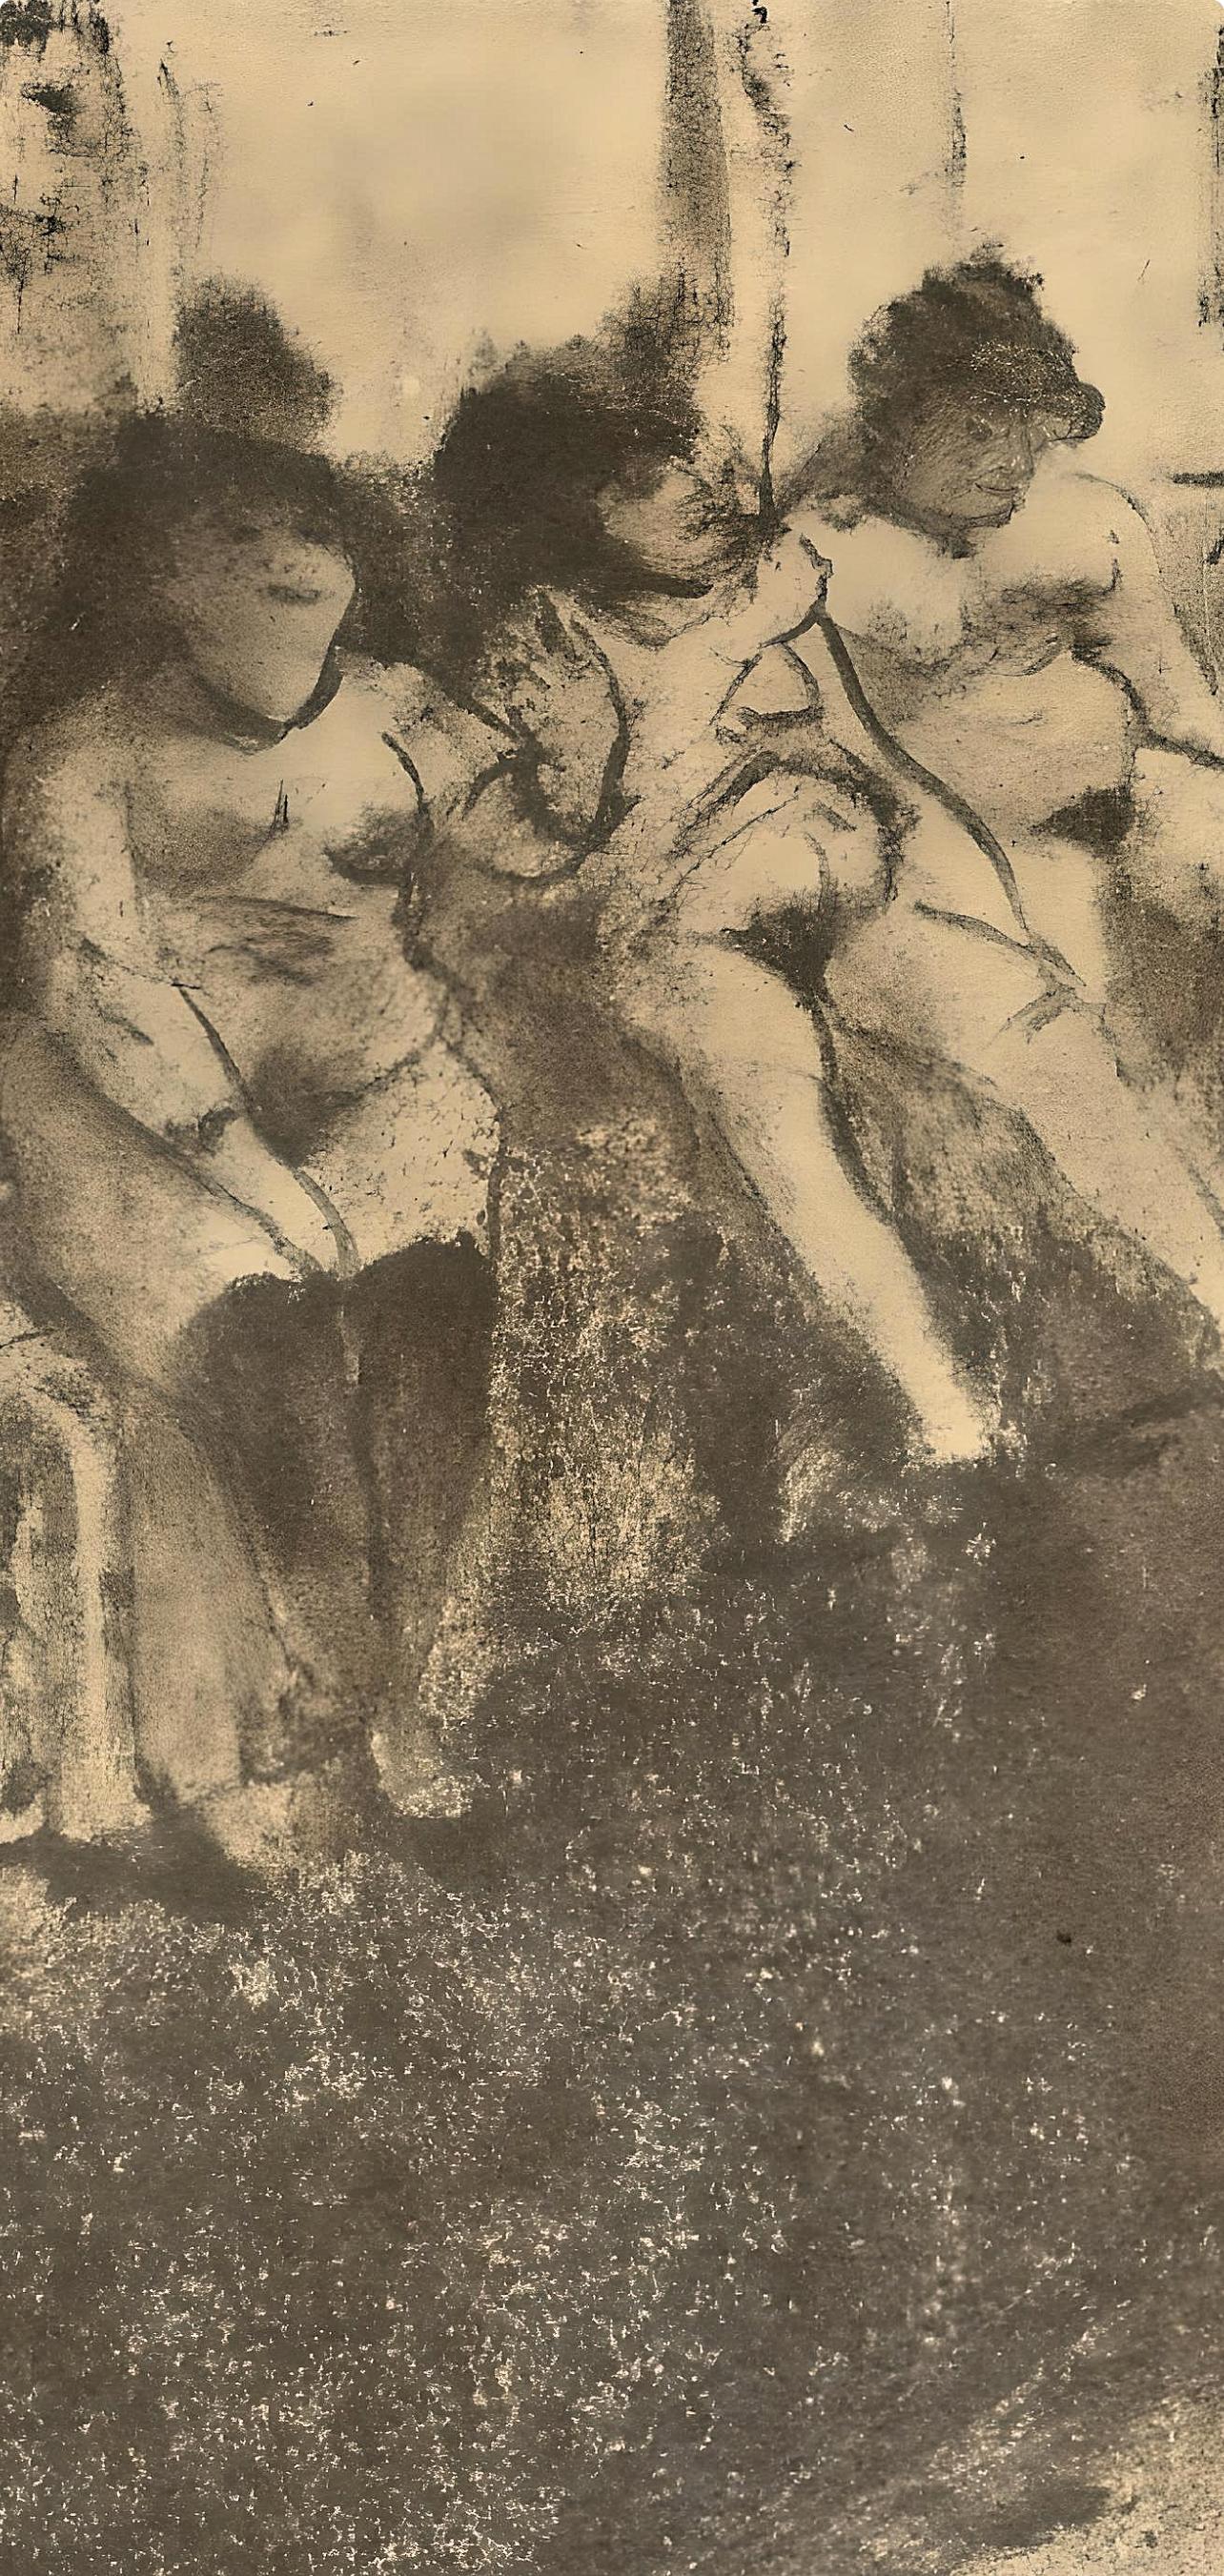 Degas, On attend les Clients, Les Monotypes (after) - Impressionist Print by Edgar Degas